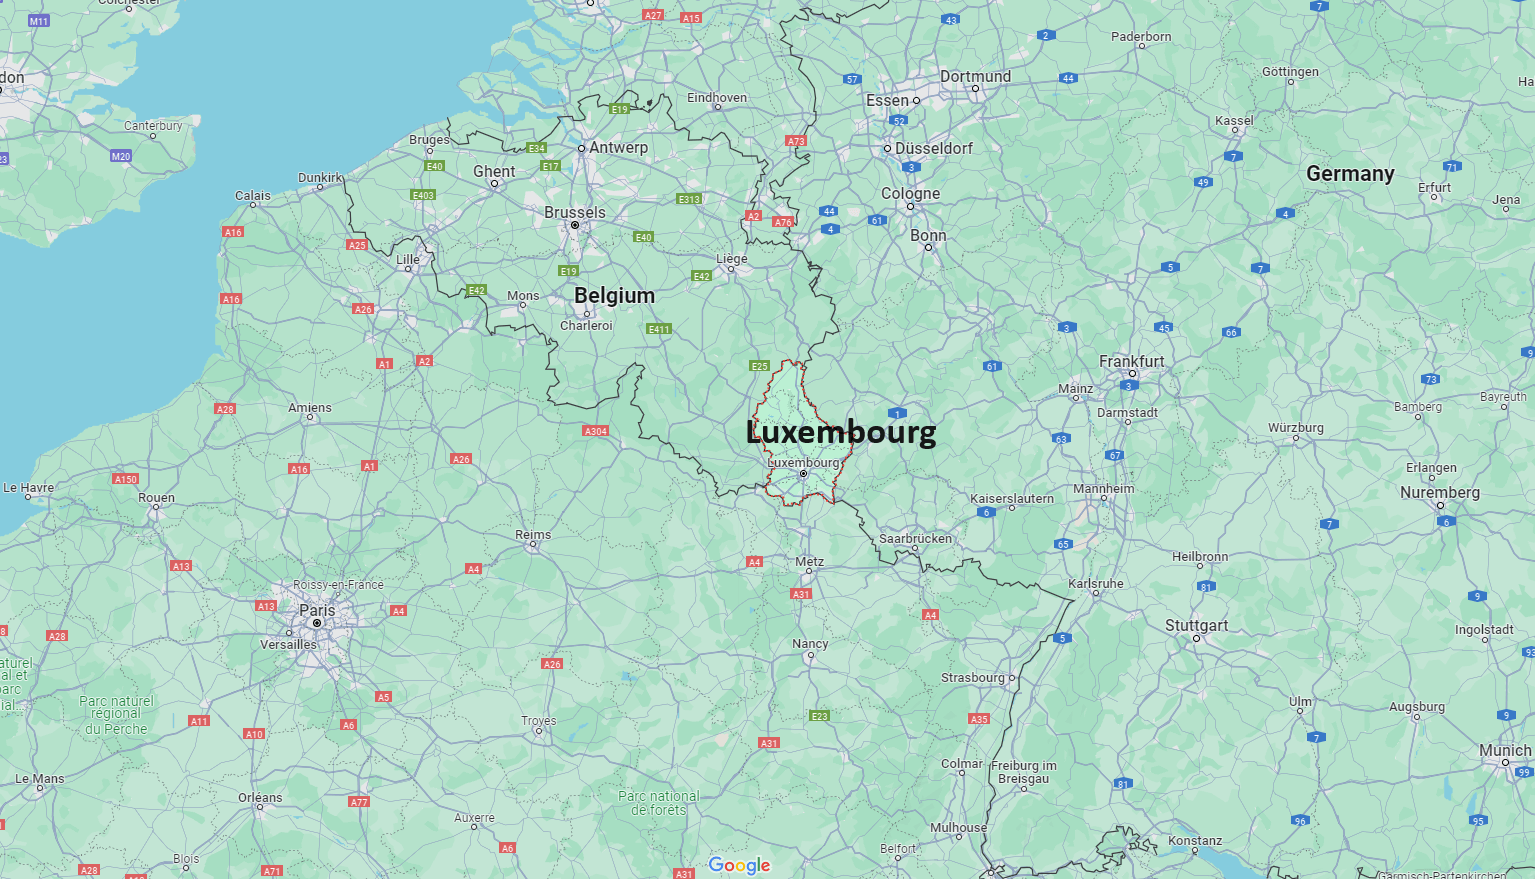 Is Luxembourg a country or a town